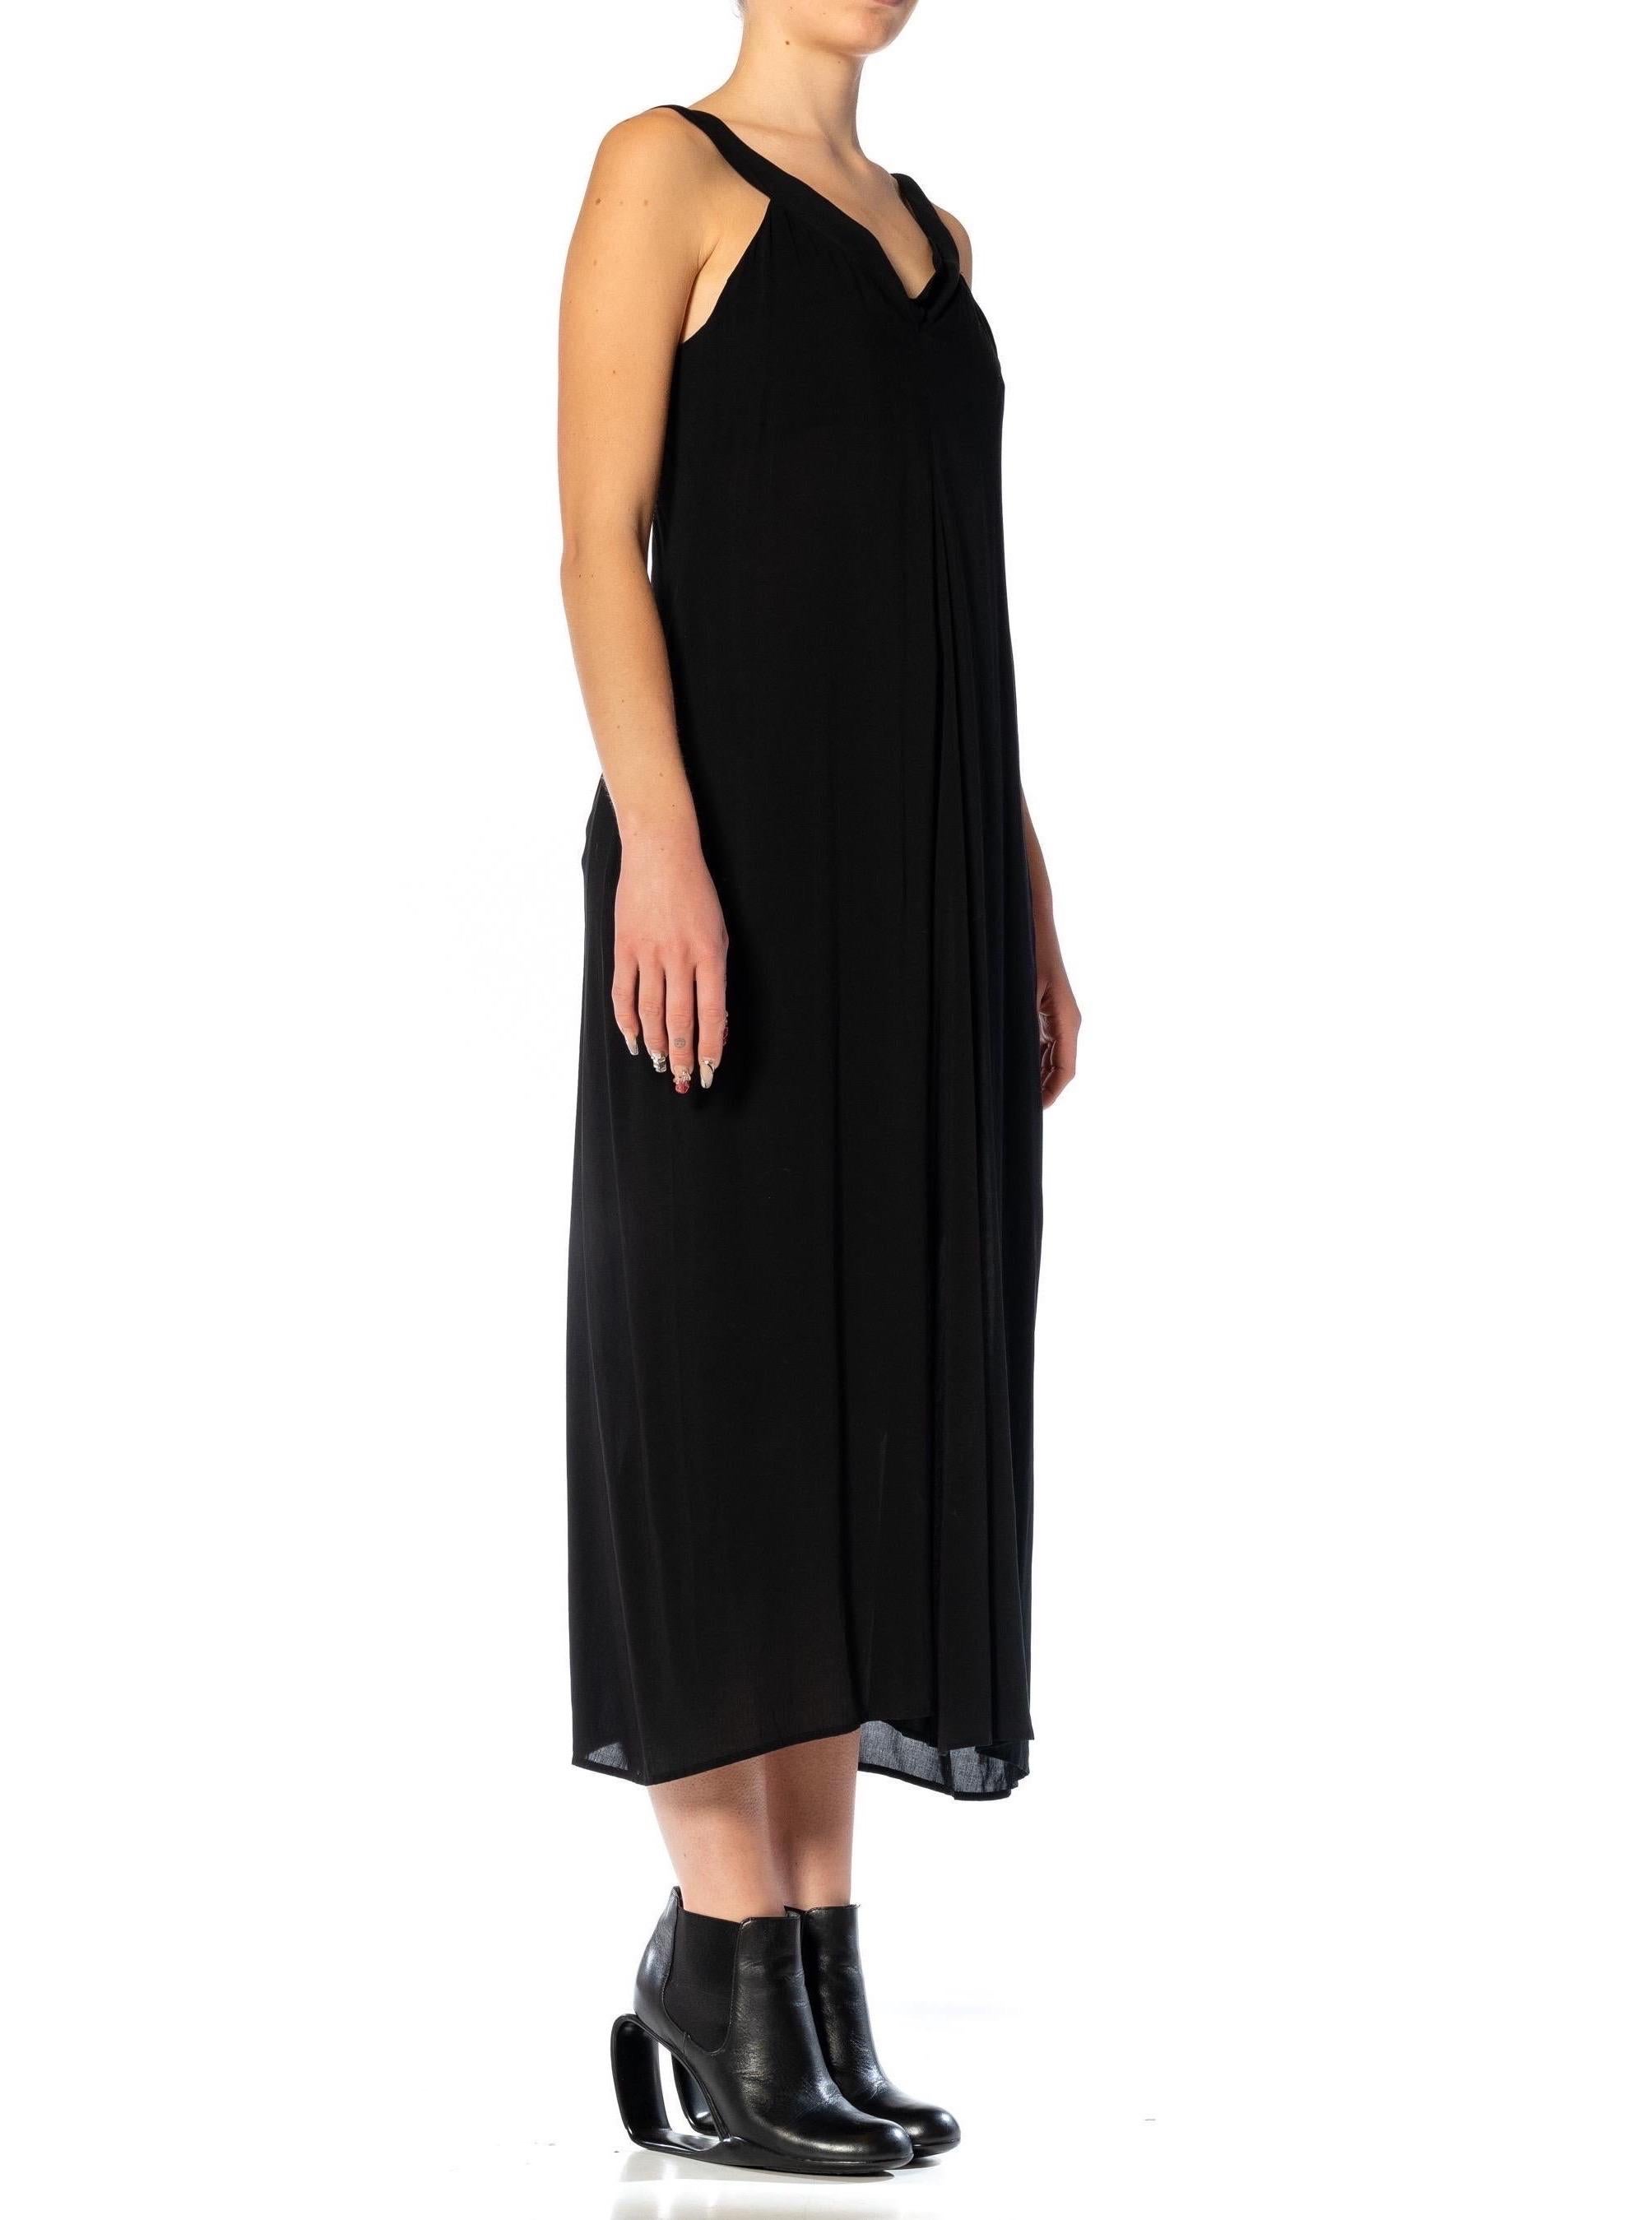 Women's 1990S Y’S YOHJI YAMAMOTO Black Wool Cowl Front Dress With Extended Flutter Pane For Sale